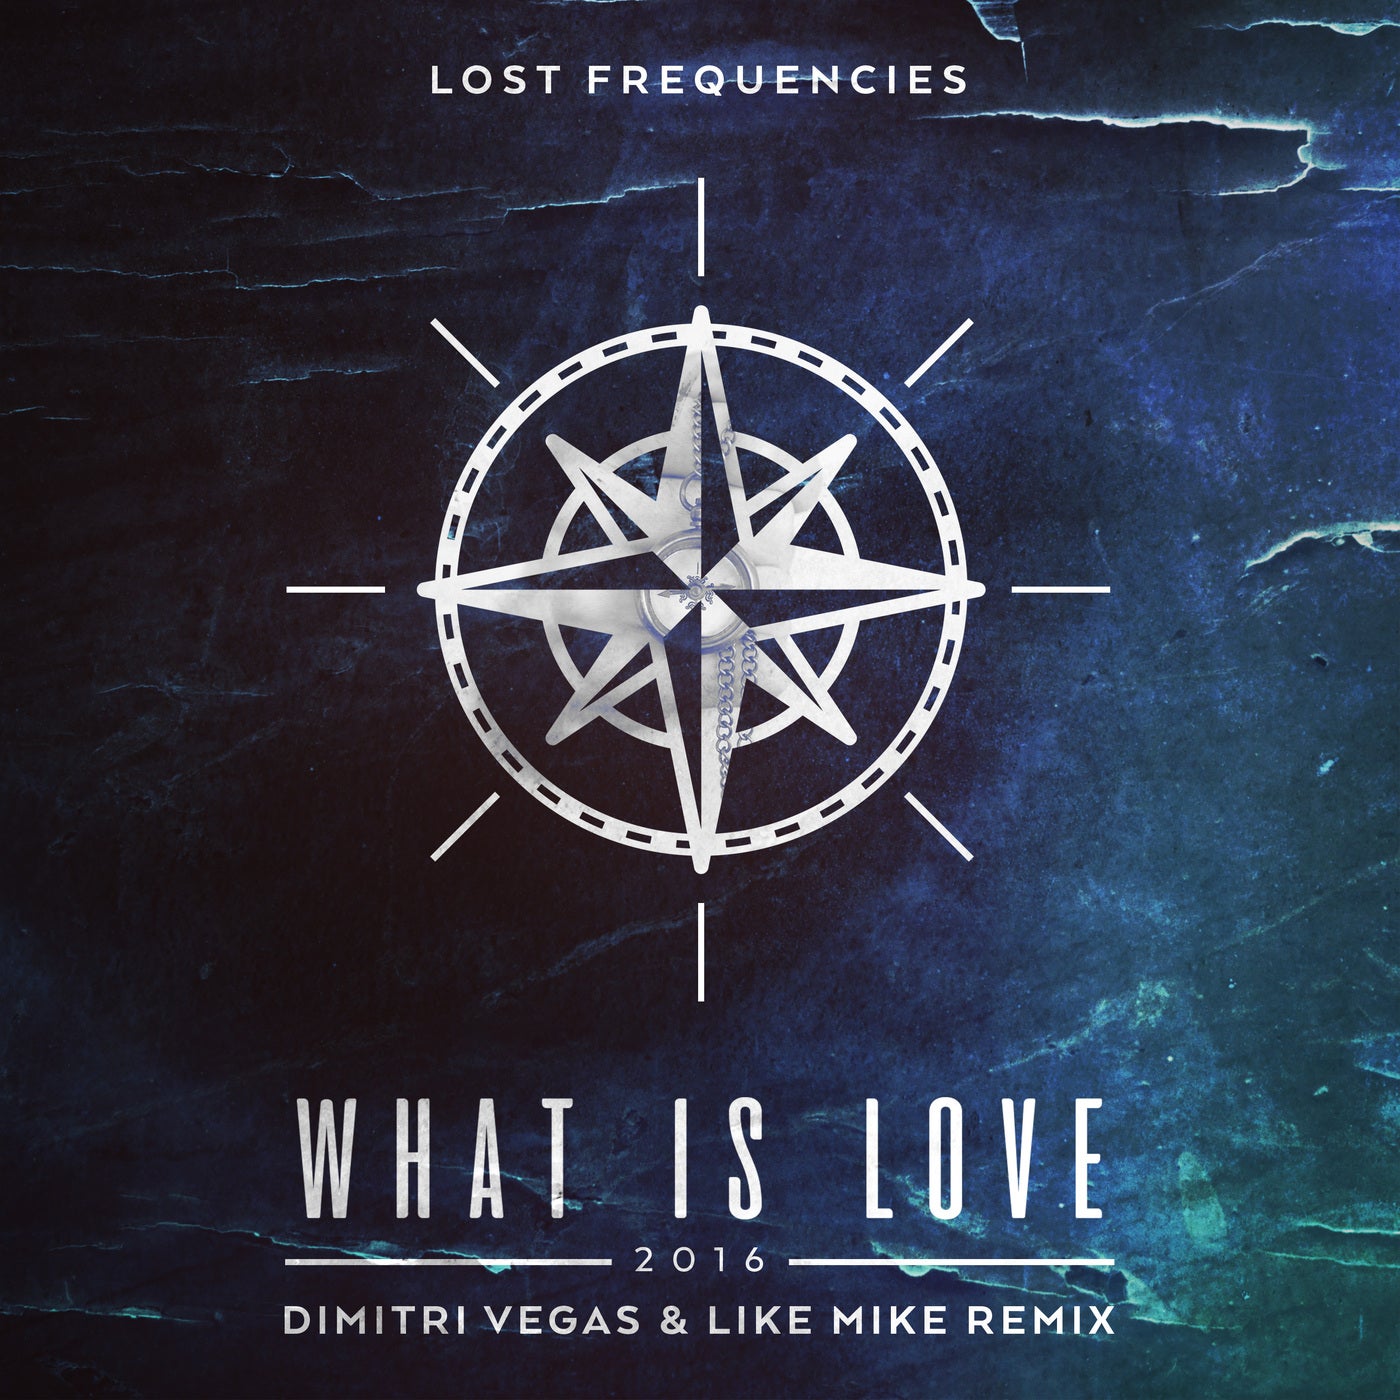 What Is Love 2016 - Dimitri Vegas & Like Mike Remix